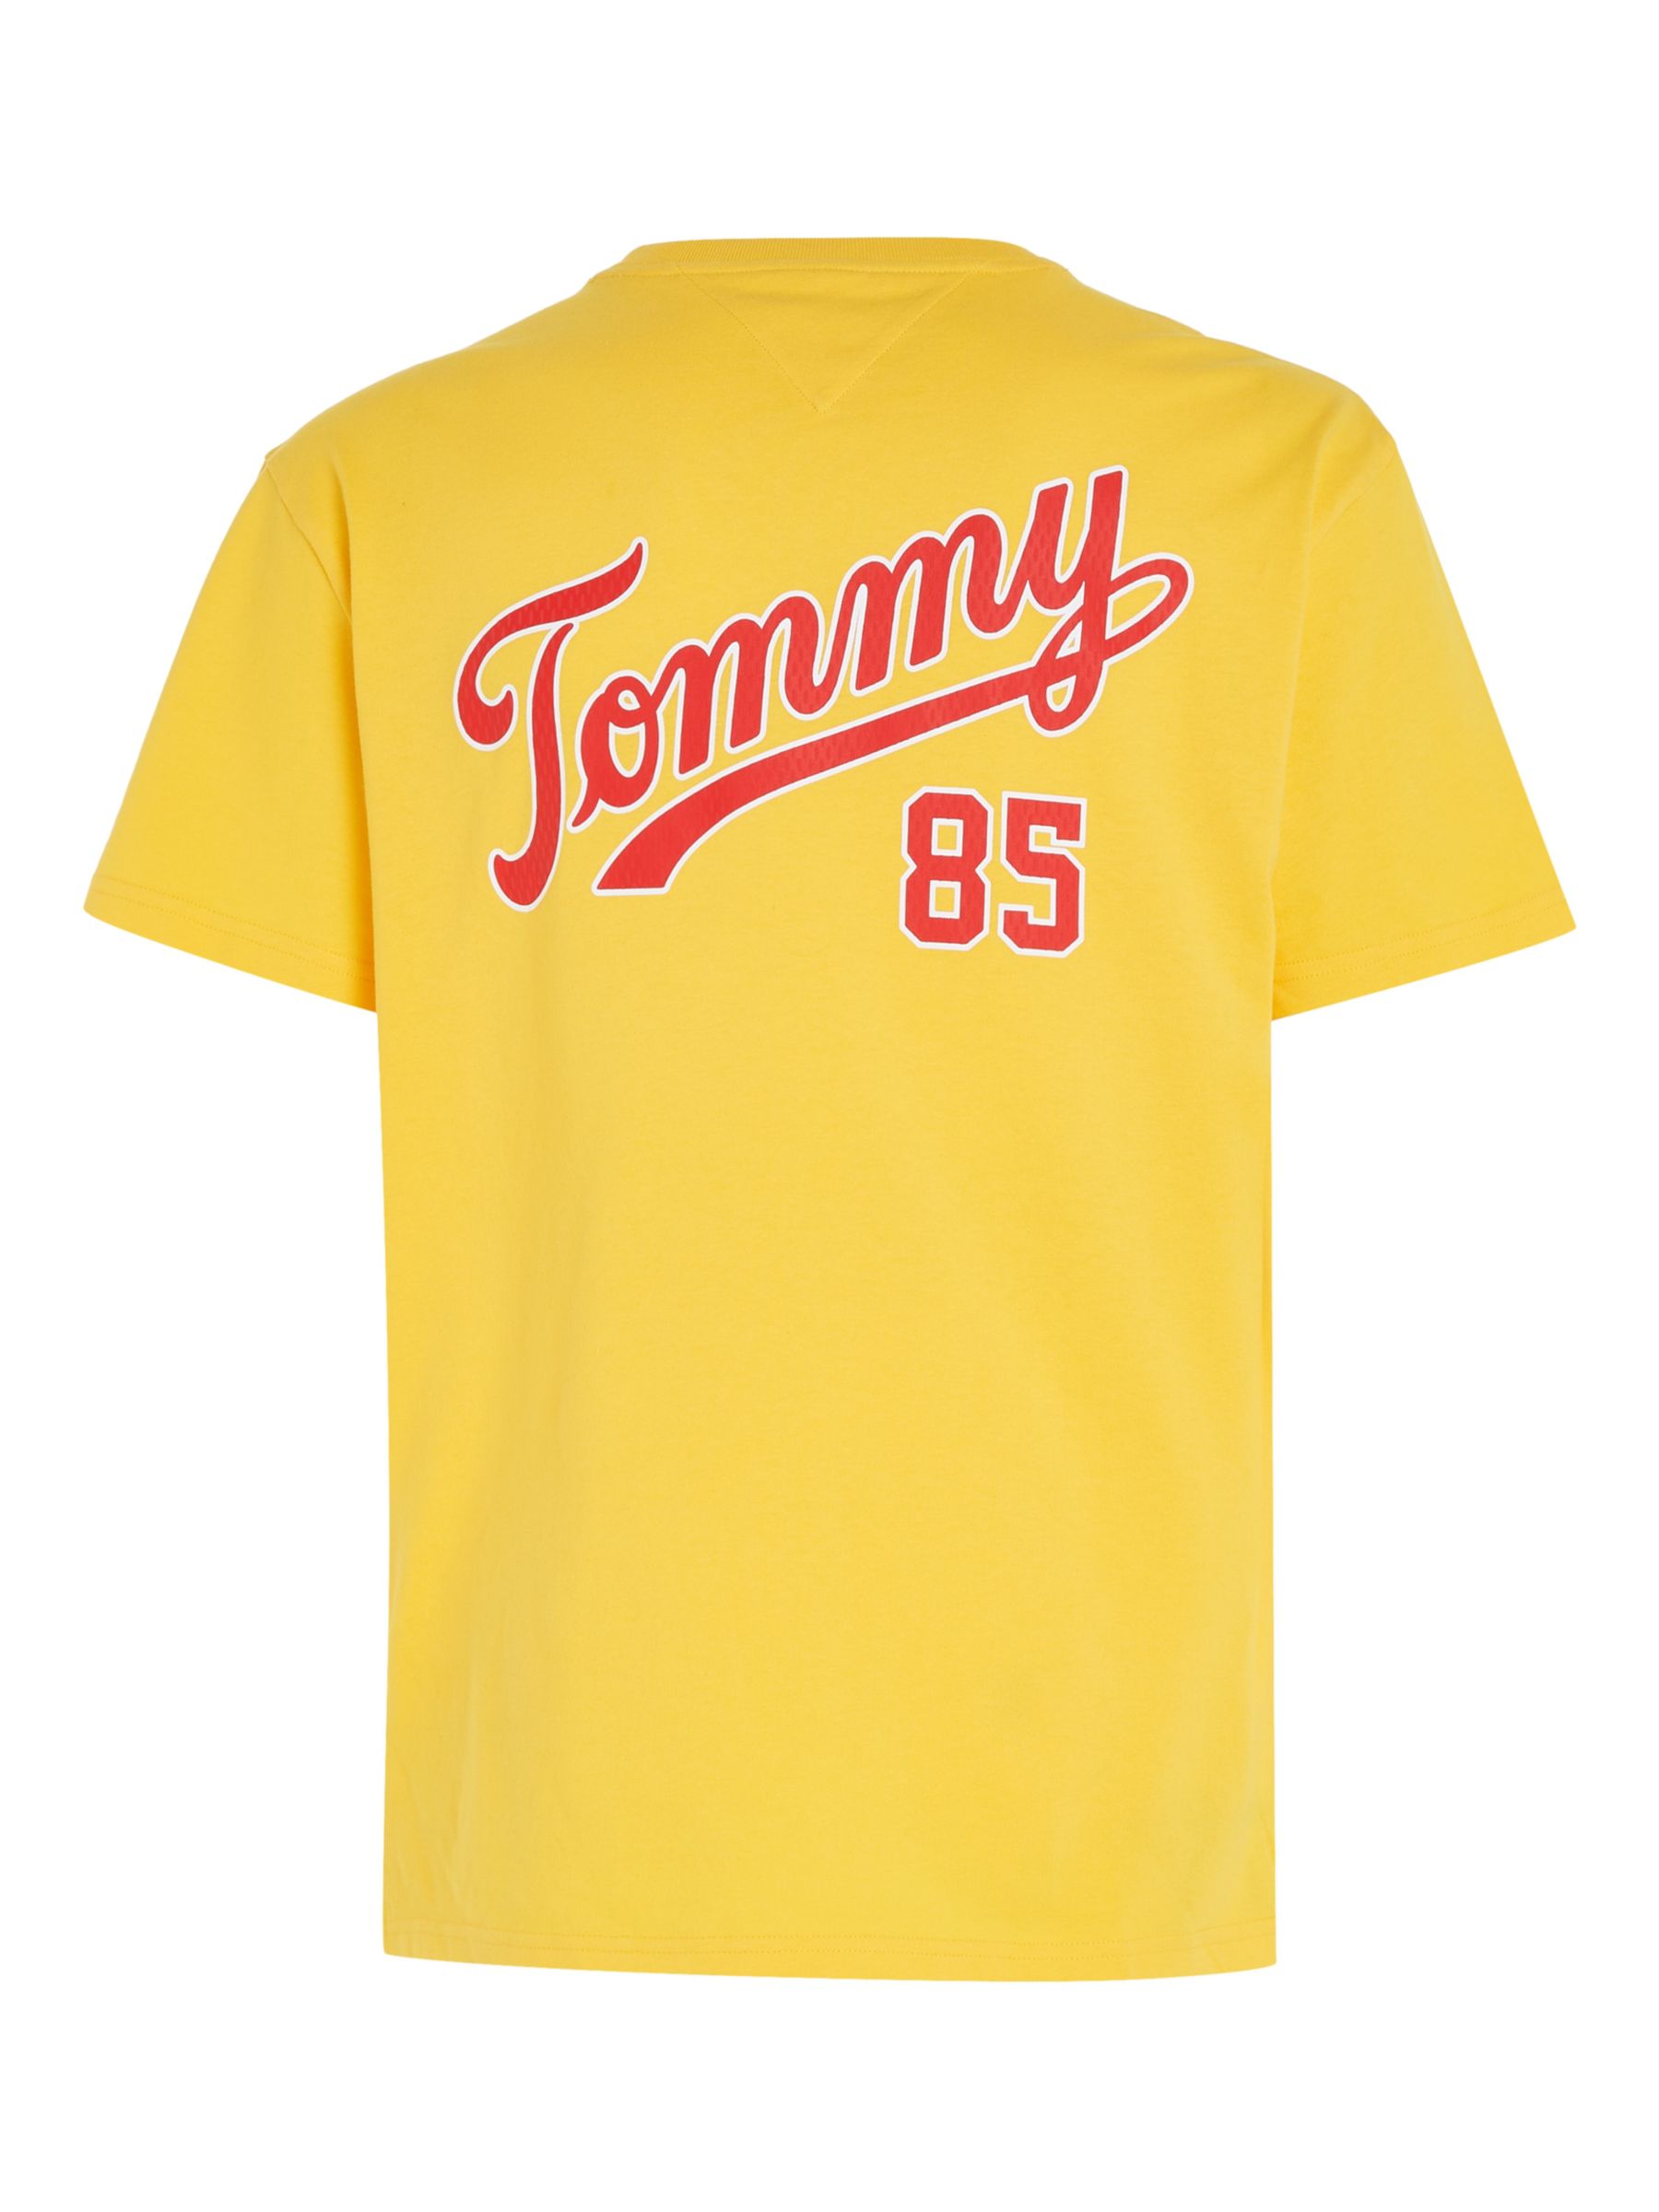 Tommy 85 at College John Partners Jeans Cotton Logo Organic Warm Yellow T-Shirt, & Lewis